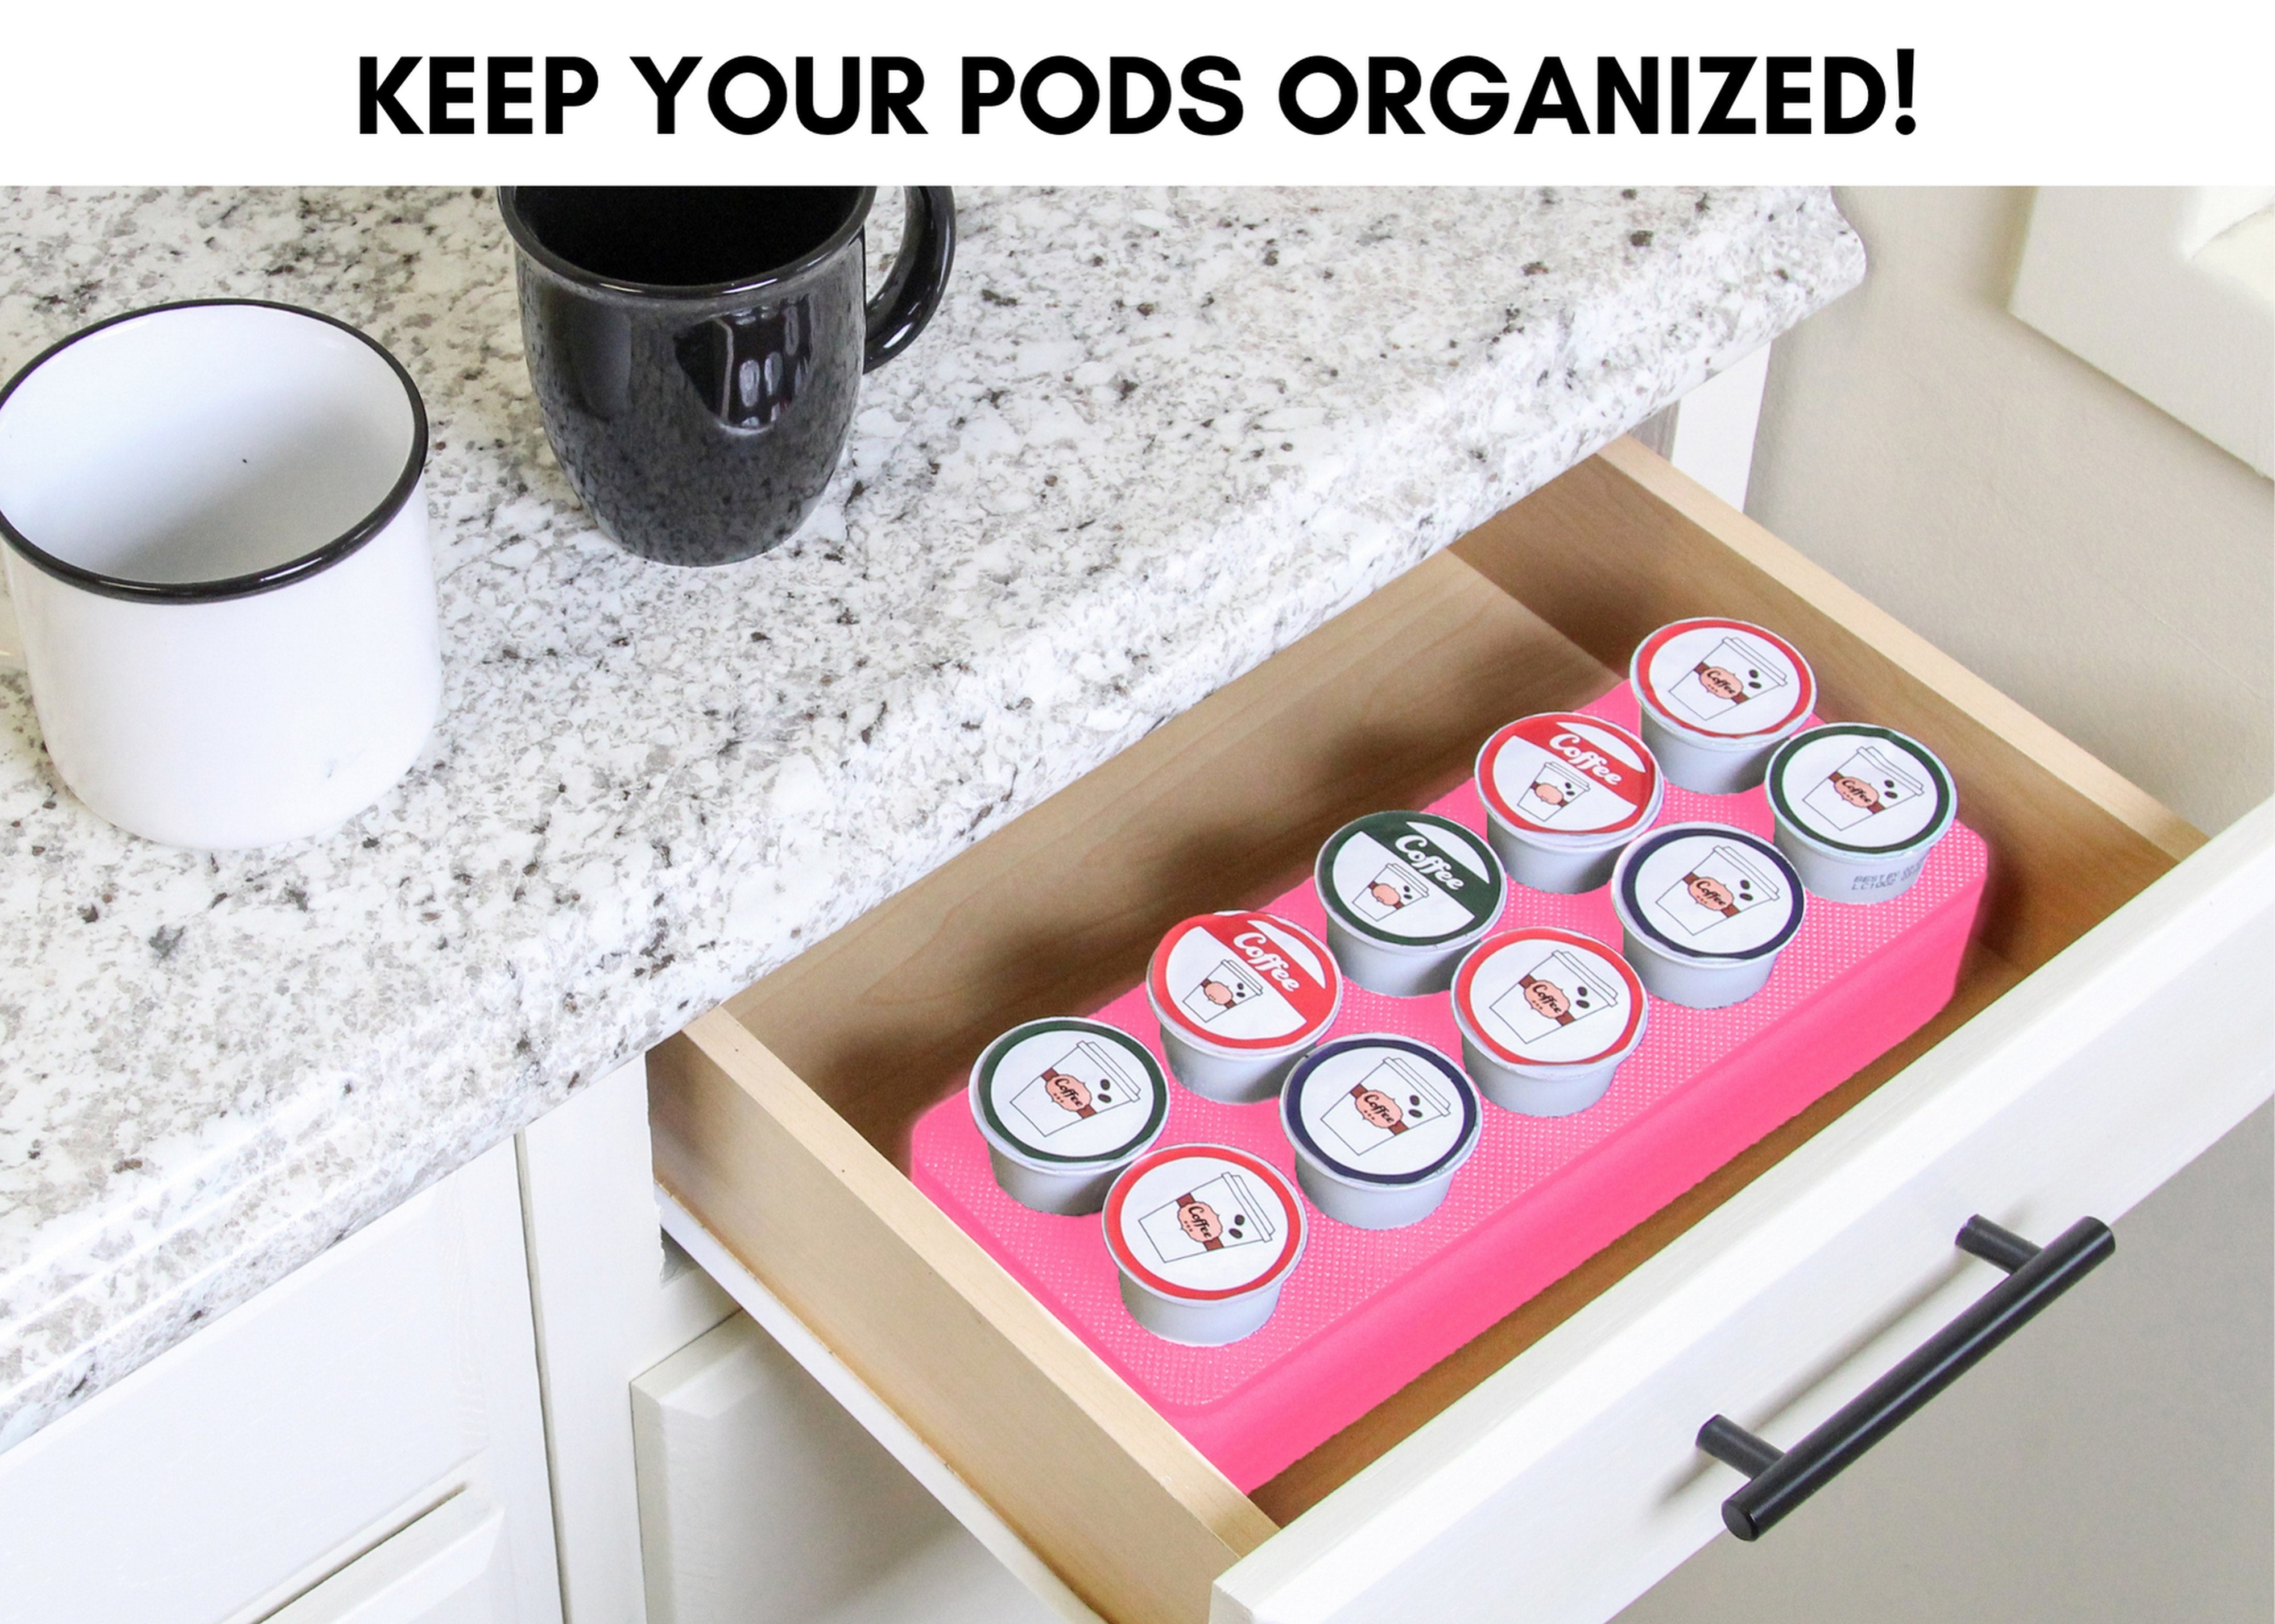 Coffee Pod Storage Deluxe Organizer Tray Drawer Insert for Kitchen Home Office Waterproof 4.5 X 11.75 Inches Holds 10 Compatible Keurig K-Cup